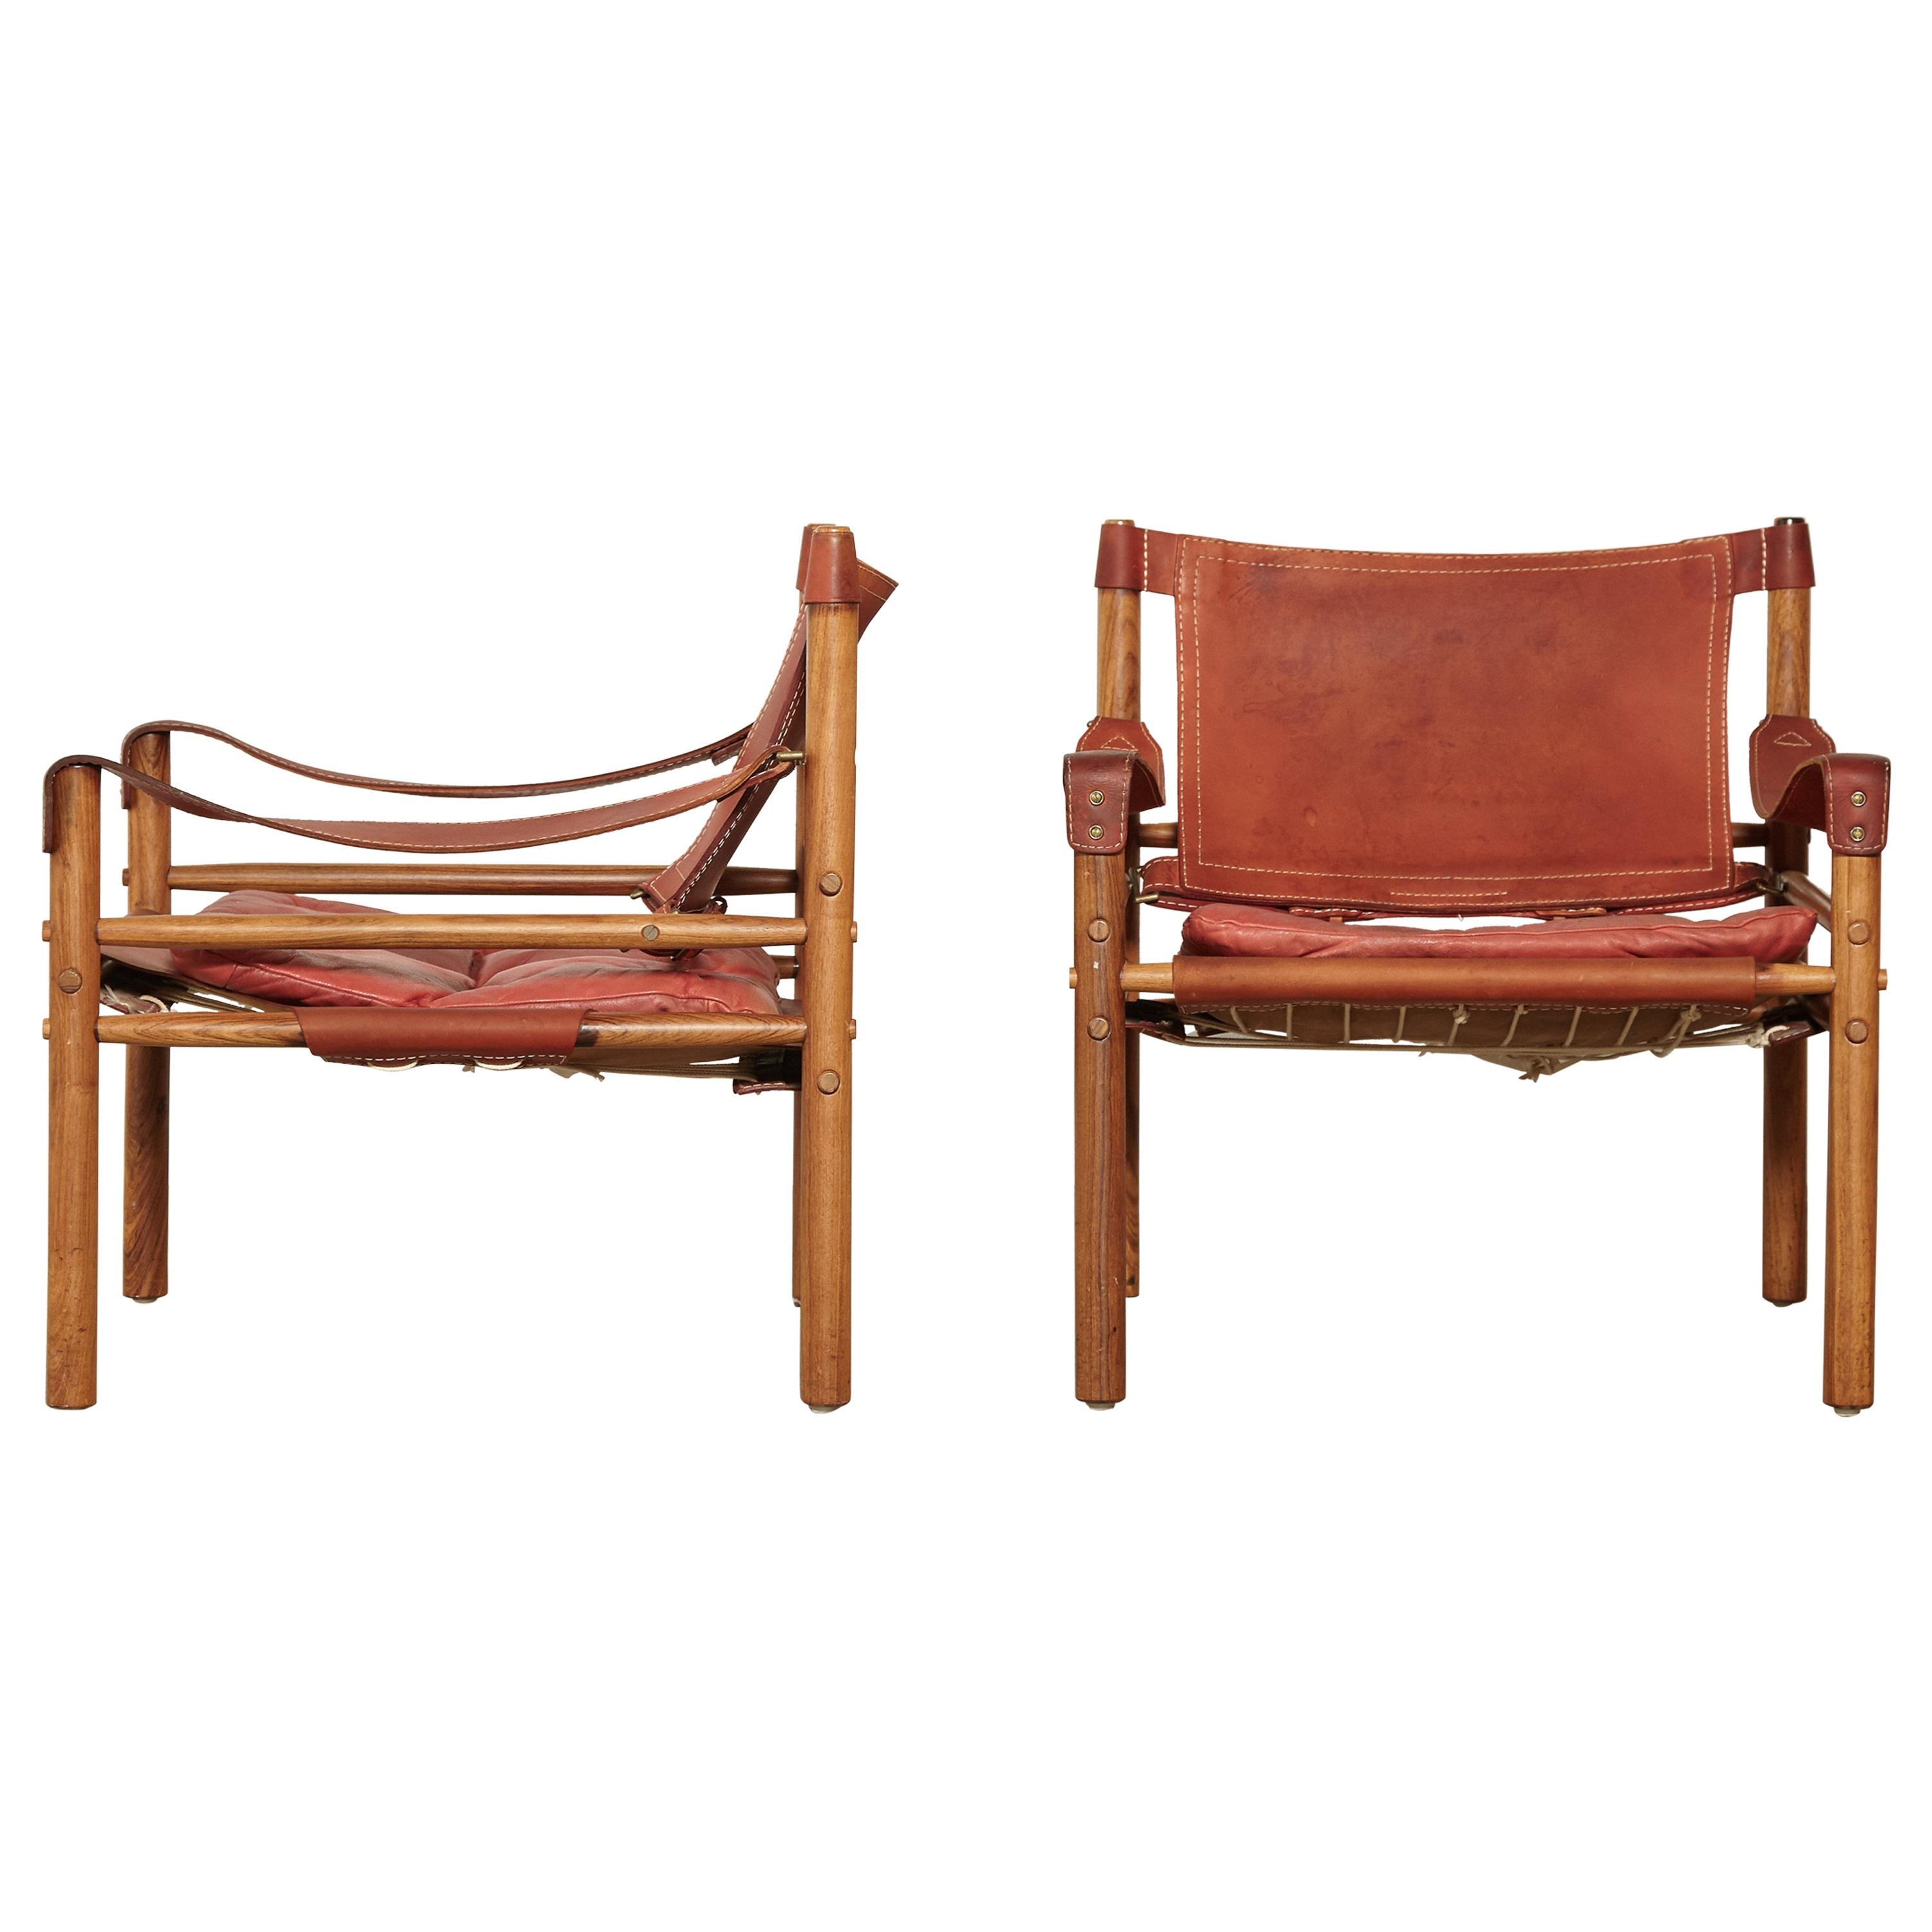 Arne Norell Rosewood and Leather Safari Sirocco Chairs, Sweden, 1960s